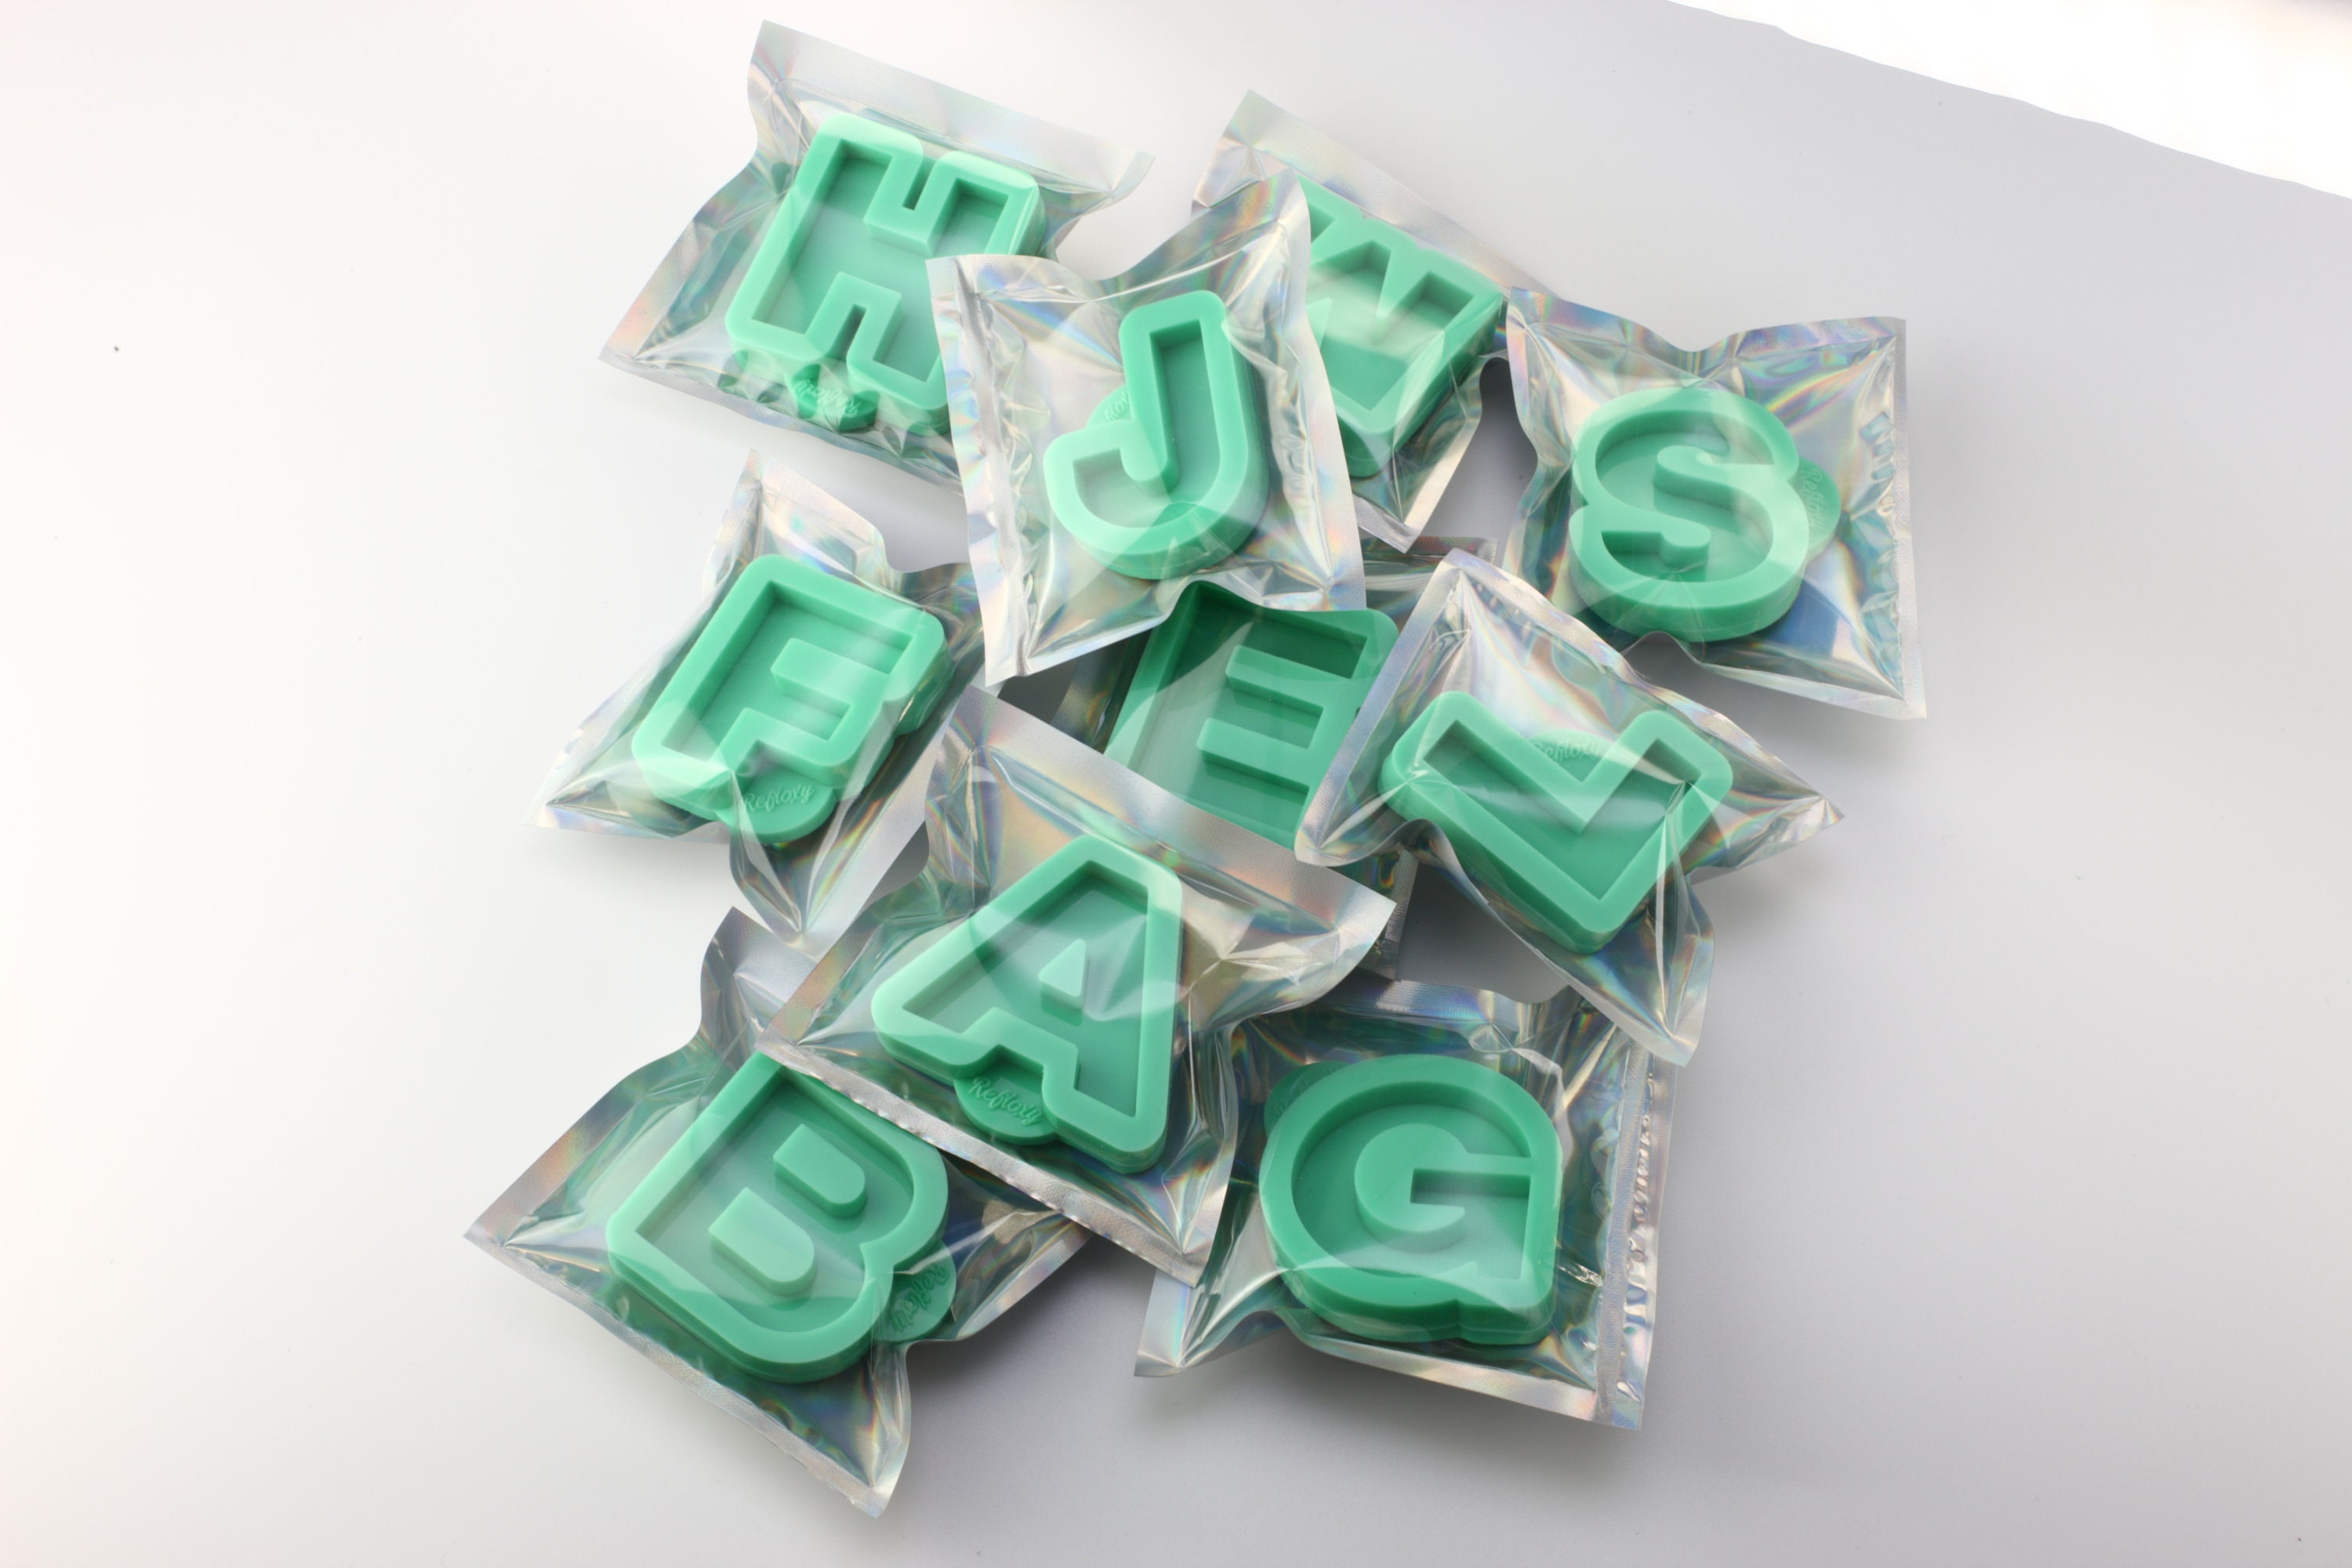 Alphabet Resin Keychain Molds, Anezus Resin Letter Molds Silicone